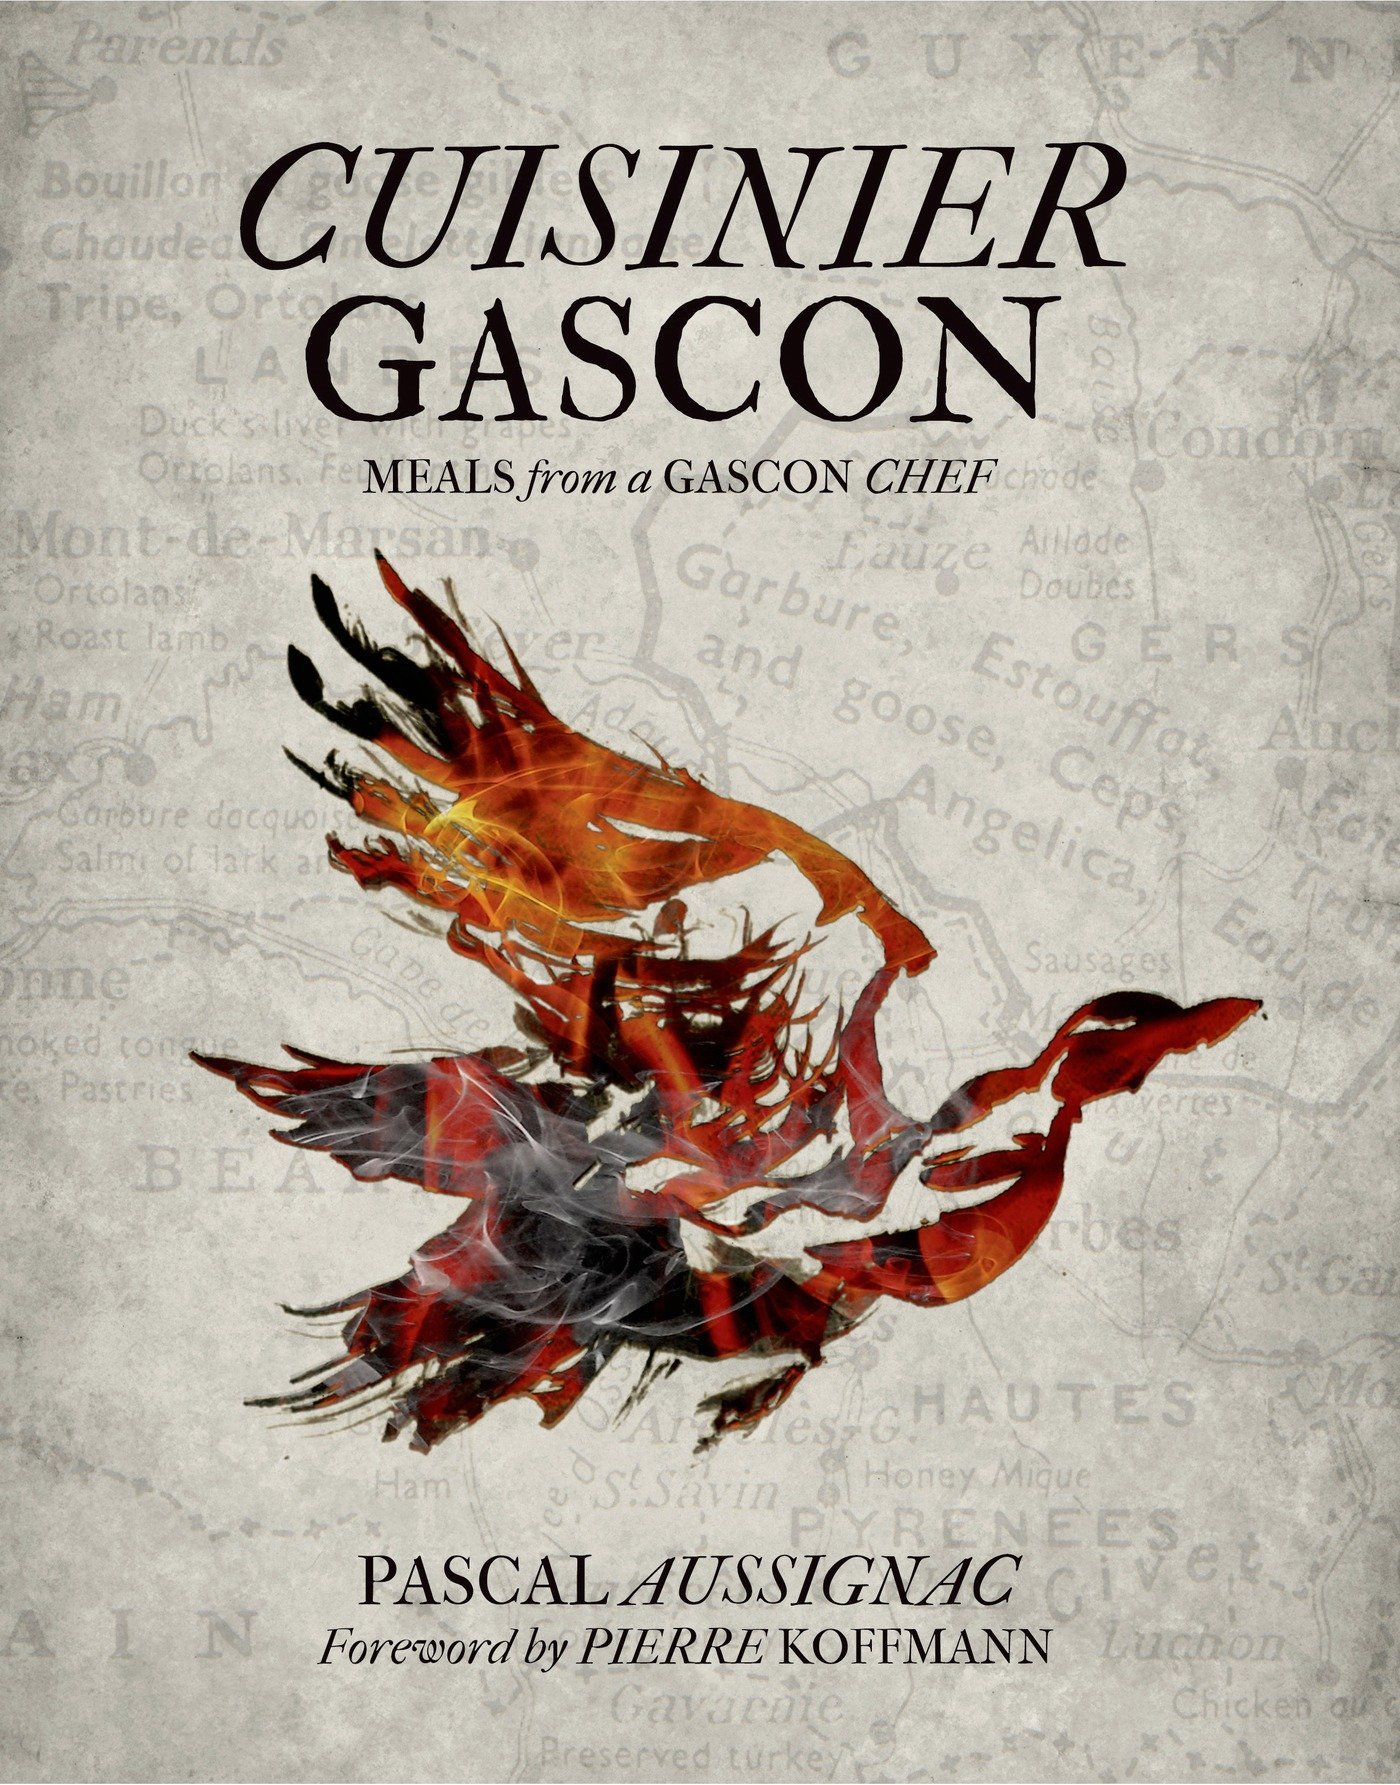 Cuisinier Gascon: Meals from a Gascon Chef by Pascal Aussignac